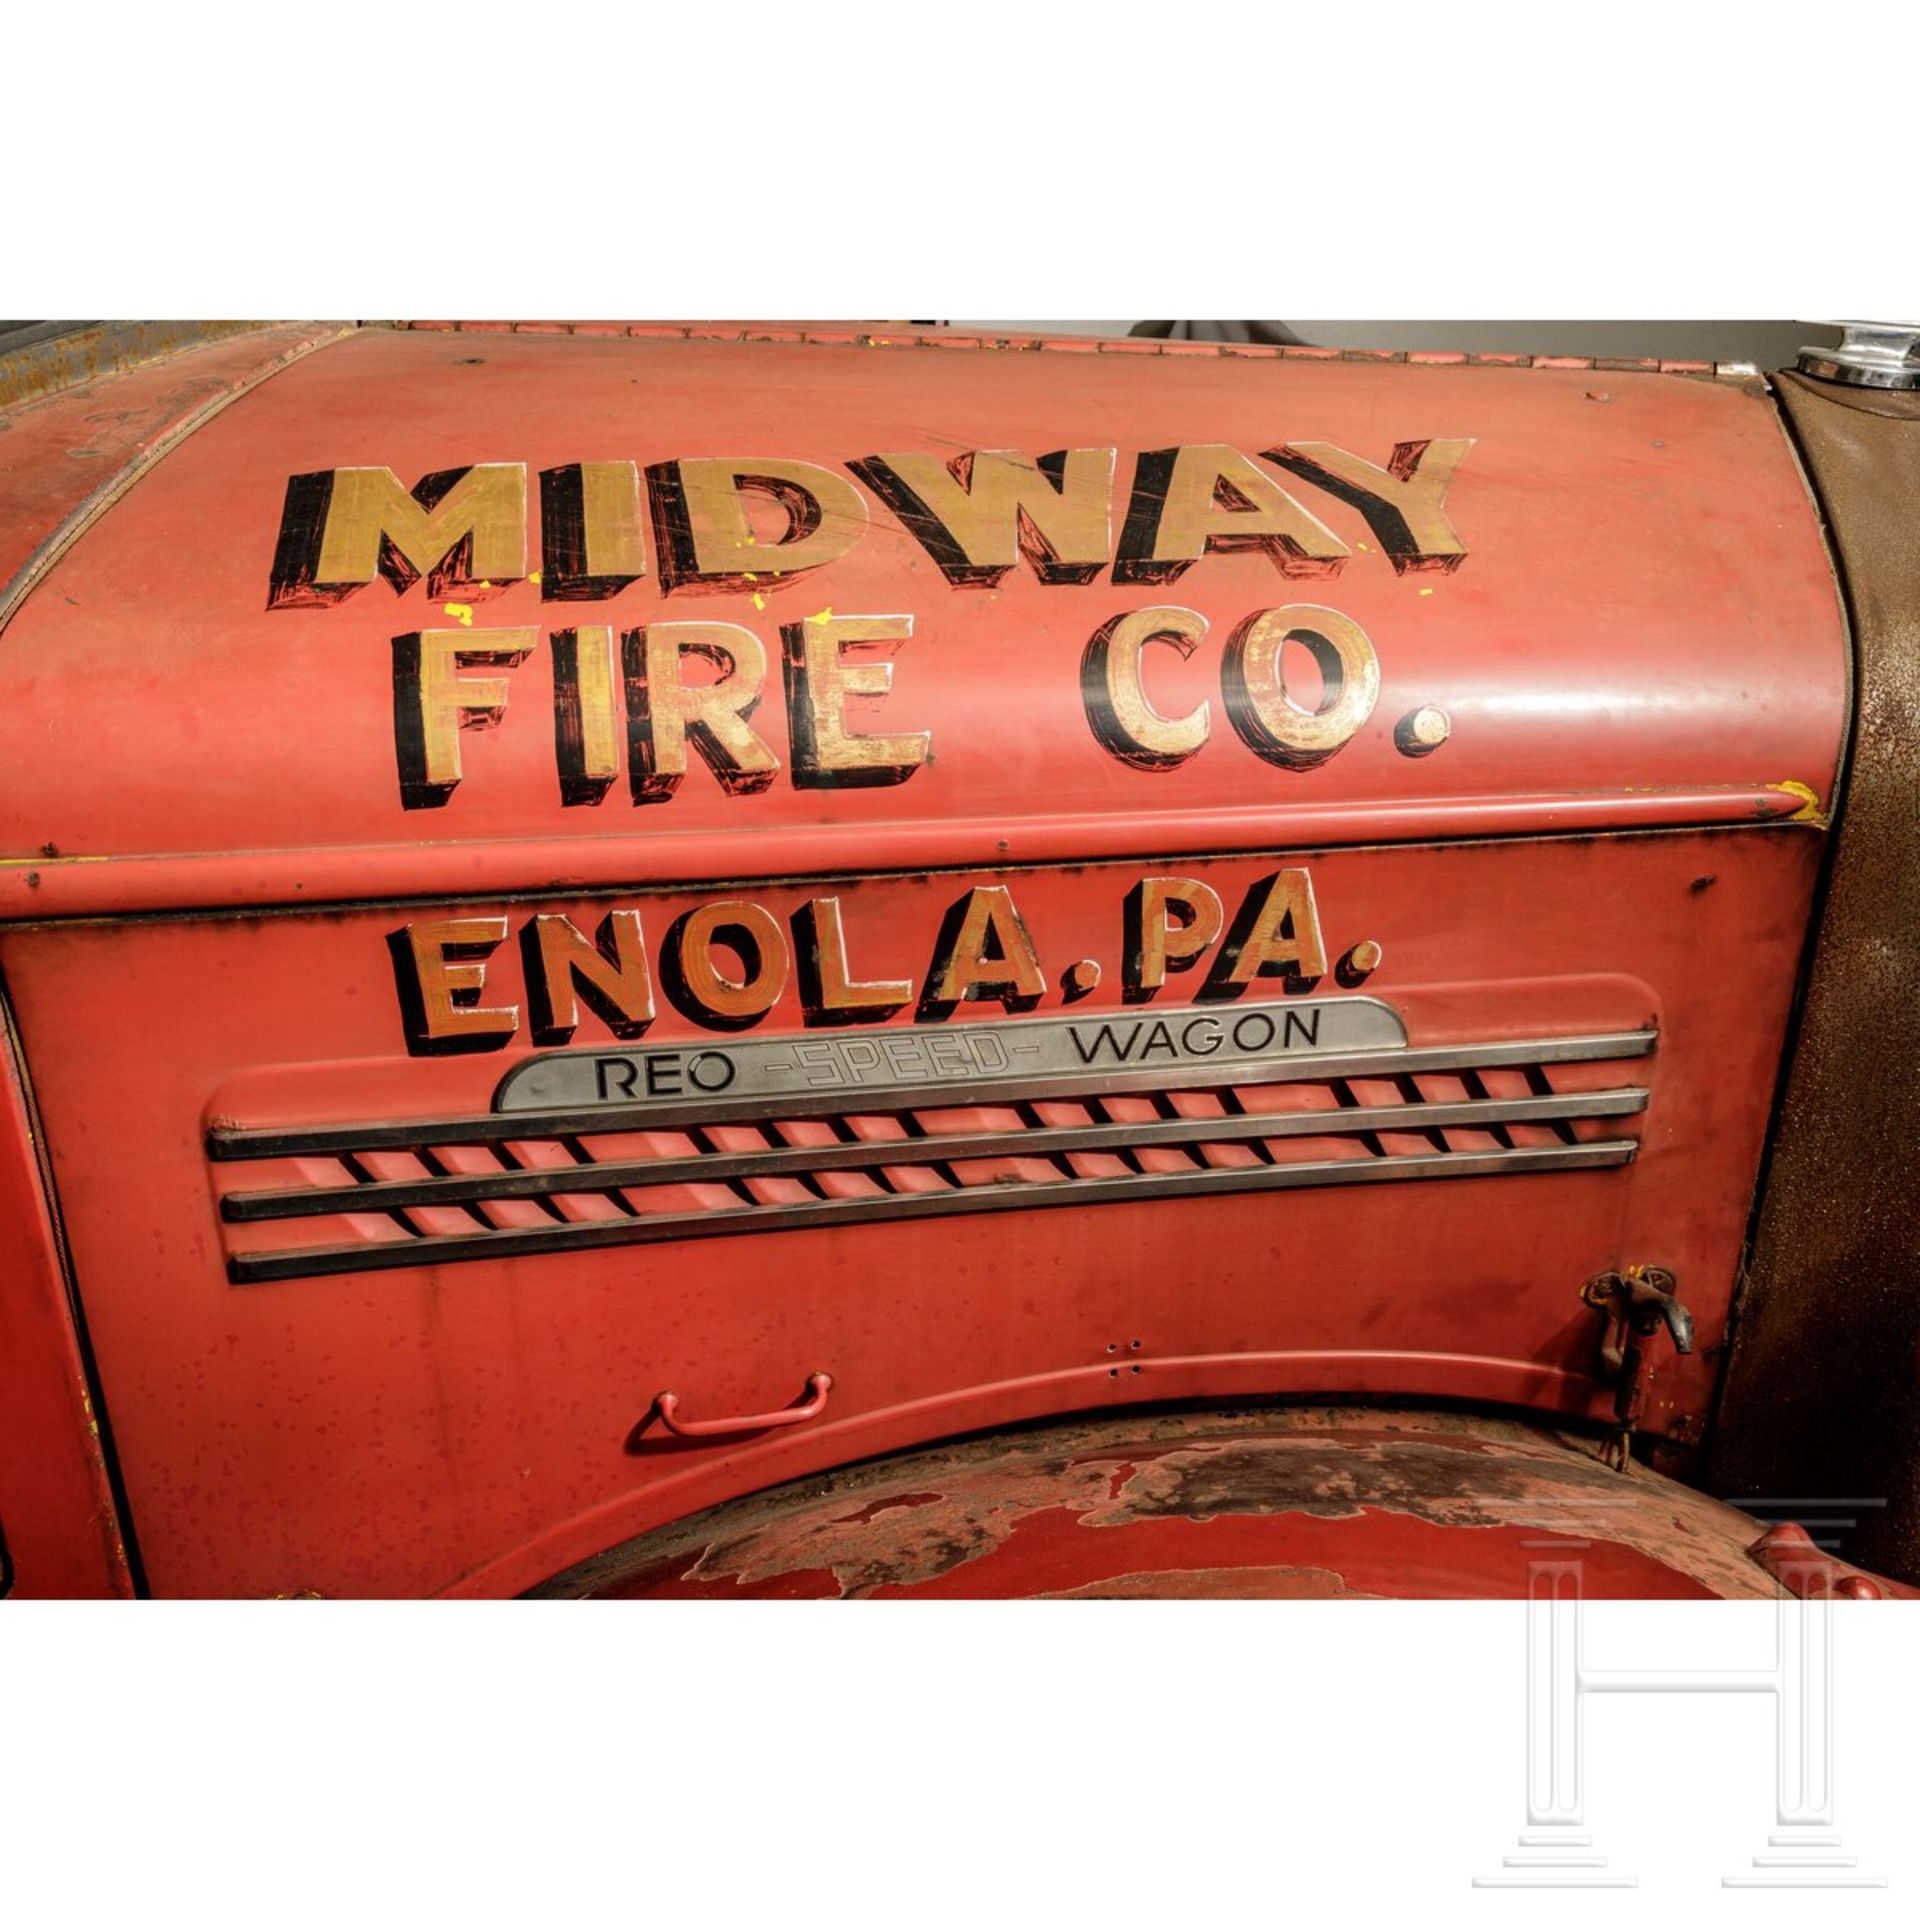 Ransom REO Speed Wagon "Feuerwehrauto", Midway Fire Company, Enola, 1937 - Image 9 of 76